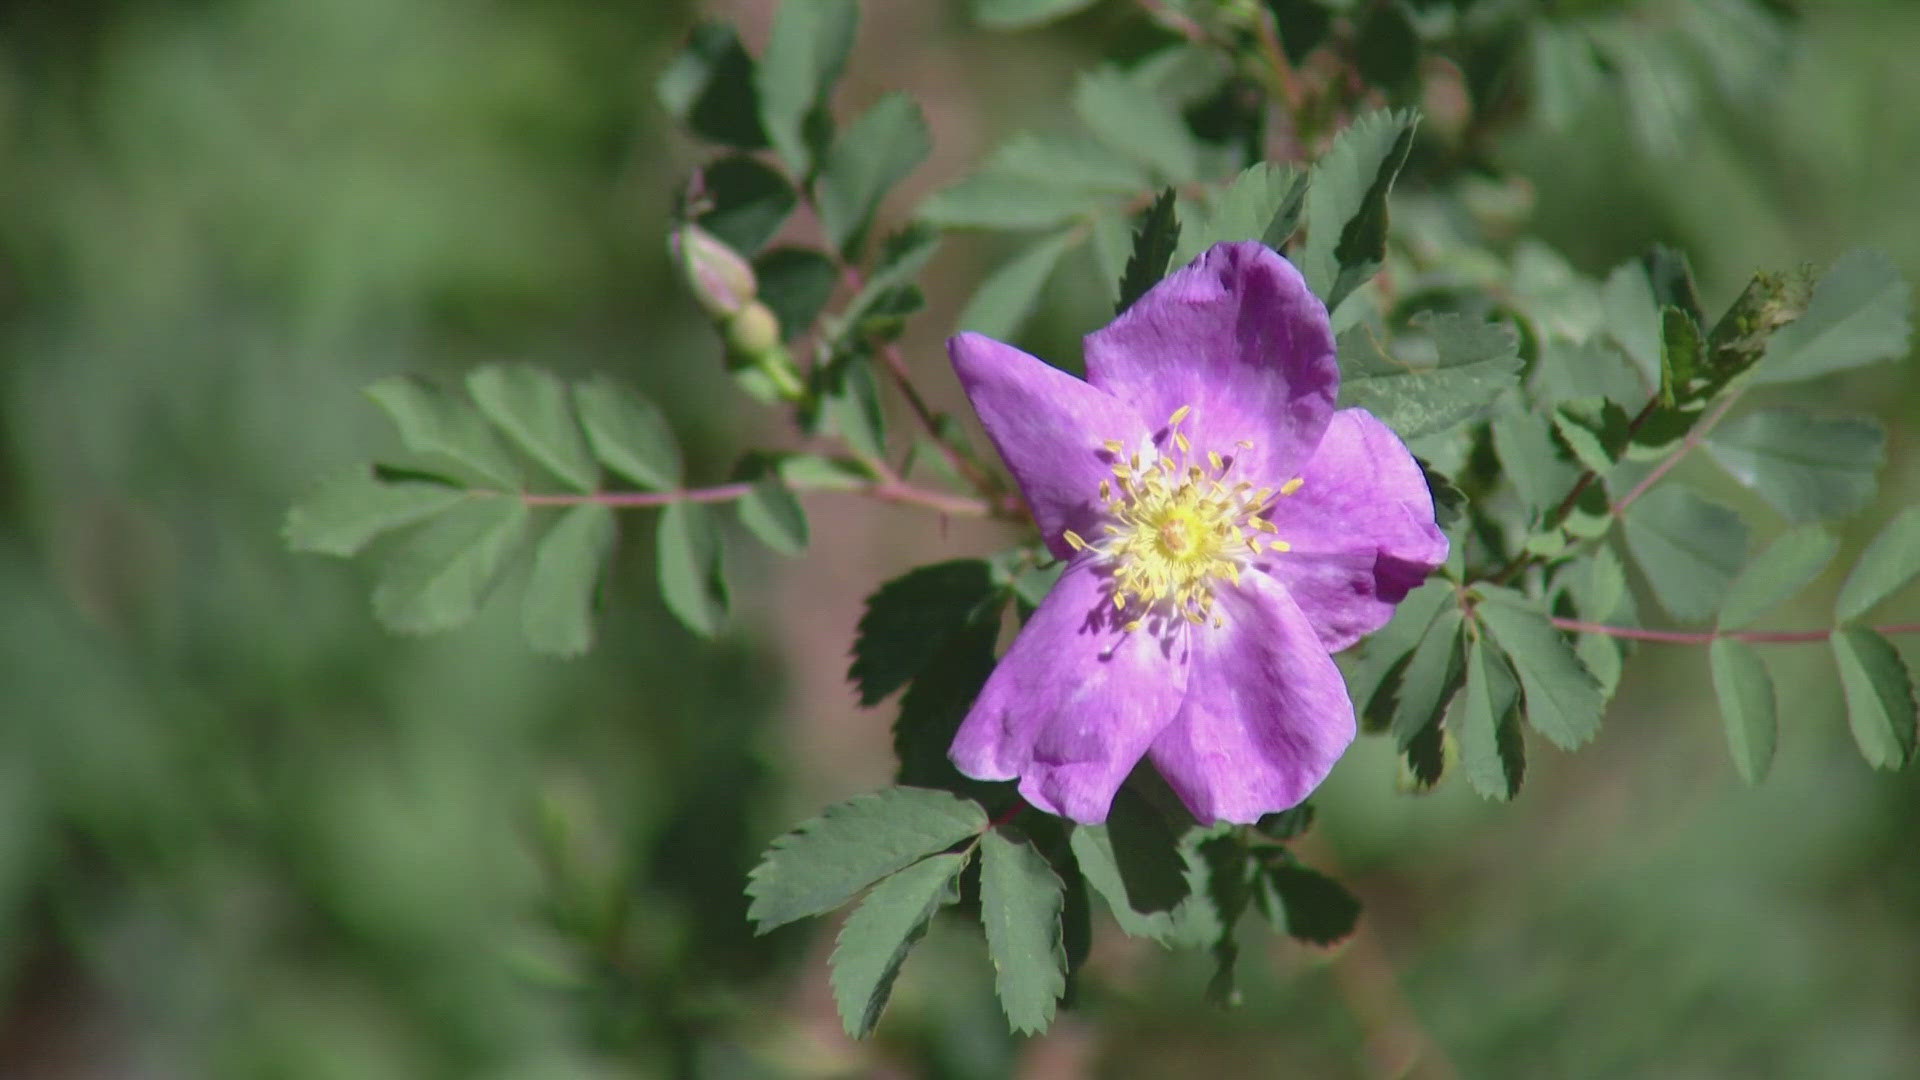 The Amache rose tells the story of one of the worst chapters of American history: The internment of Japanese Americans at places like Amache in Colorado.